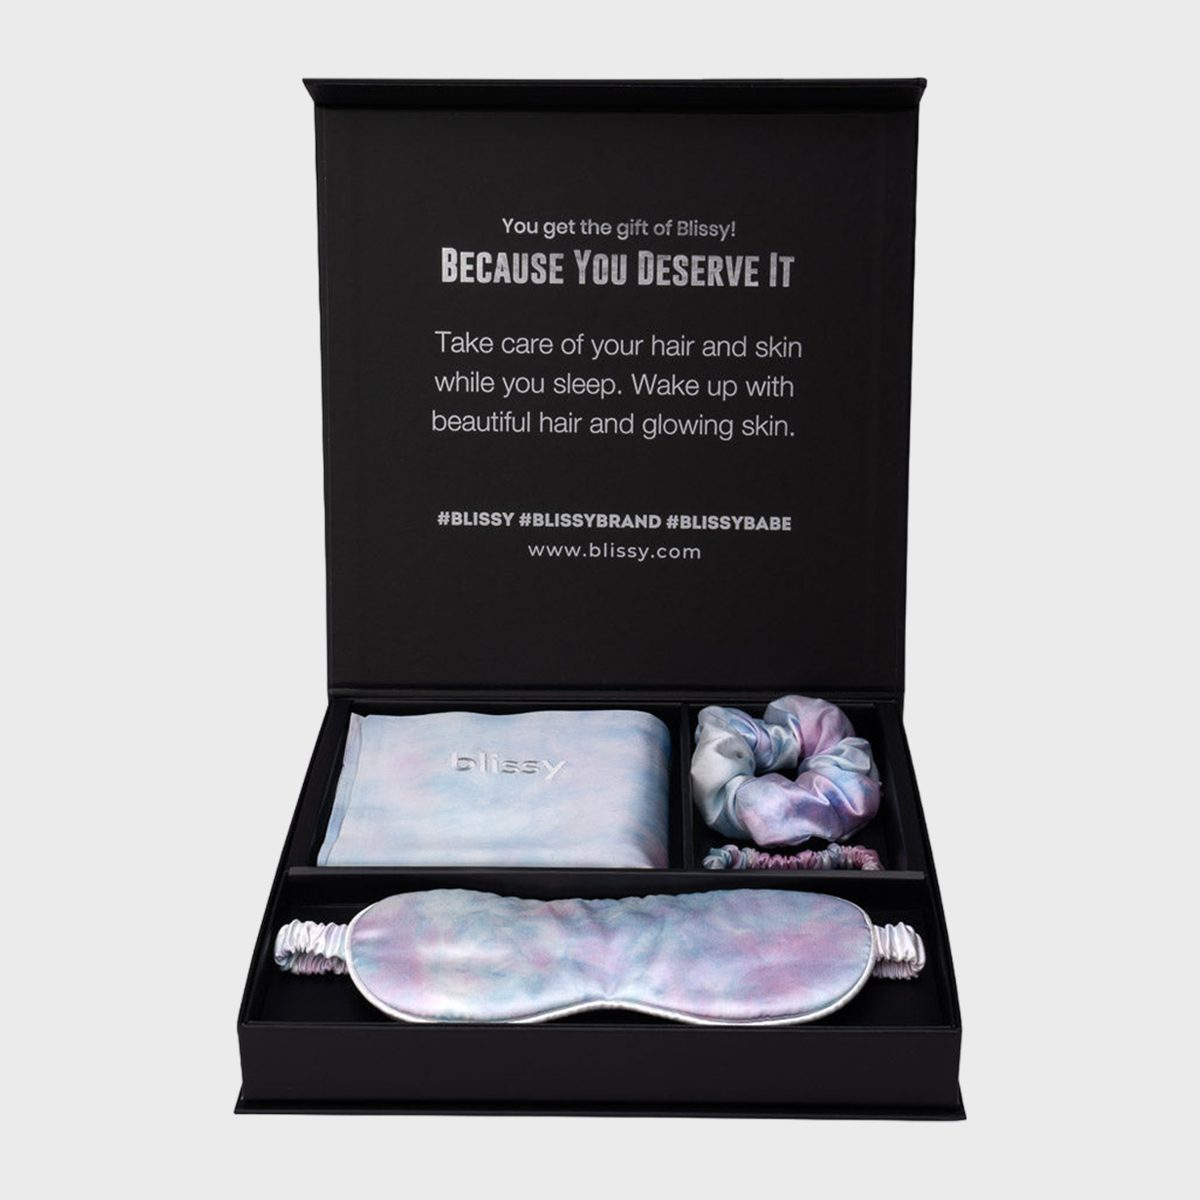 <p>Give the gift of elevated sleep with <a href="https://blissy.com/products/blissy-dream-set-tie-dye-standard" rel="noopener noreferrer">Blissy's dream set</a>. She'll receive a luxurious silk pillowcase, eye mask and two hair scrunchies packed in a giftable box. It's all machine washable, but that's not even the best part. In addition to feeling like a queen, using a <a href="https://www.rd.com/list/best-silk-pillowcase/" rel="noopener noreferrer">silk pillowcase</a> is actually better for her skin and hair.</p> <p class="listicle-page__cta-button-shop"><a class="shop-btn" href="https://blissy.com/products/blissy-dream-set-tie-dye-standard">Shop Now</a></p>